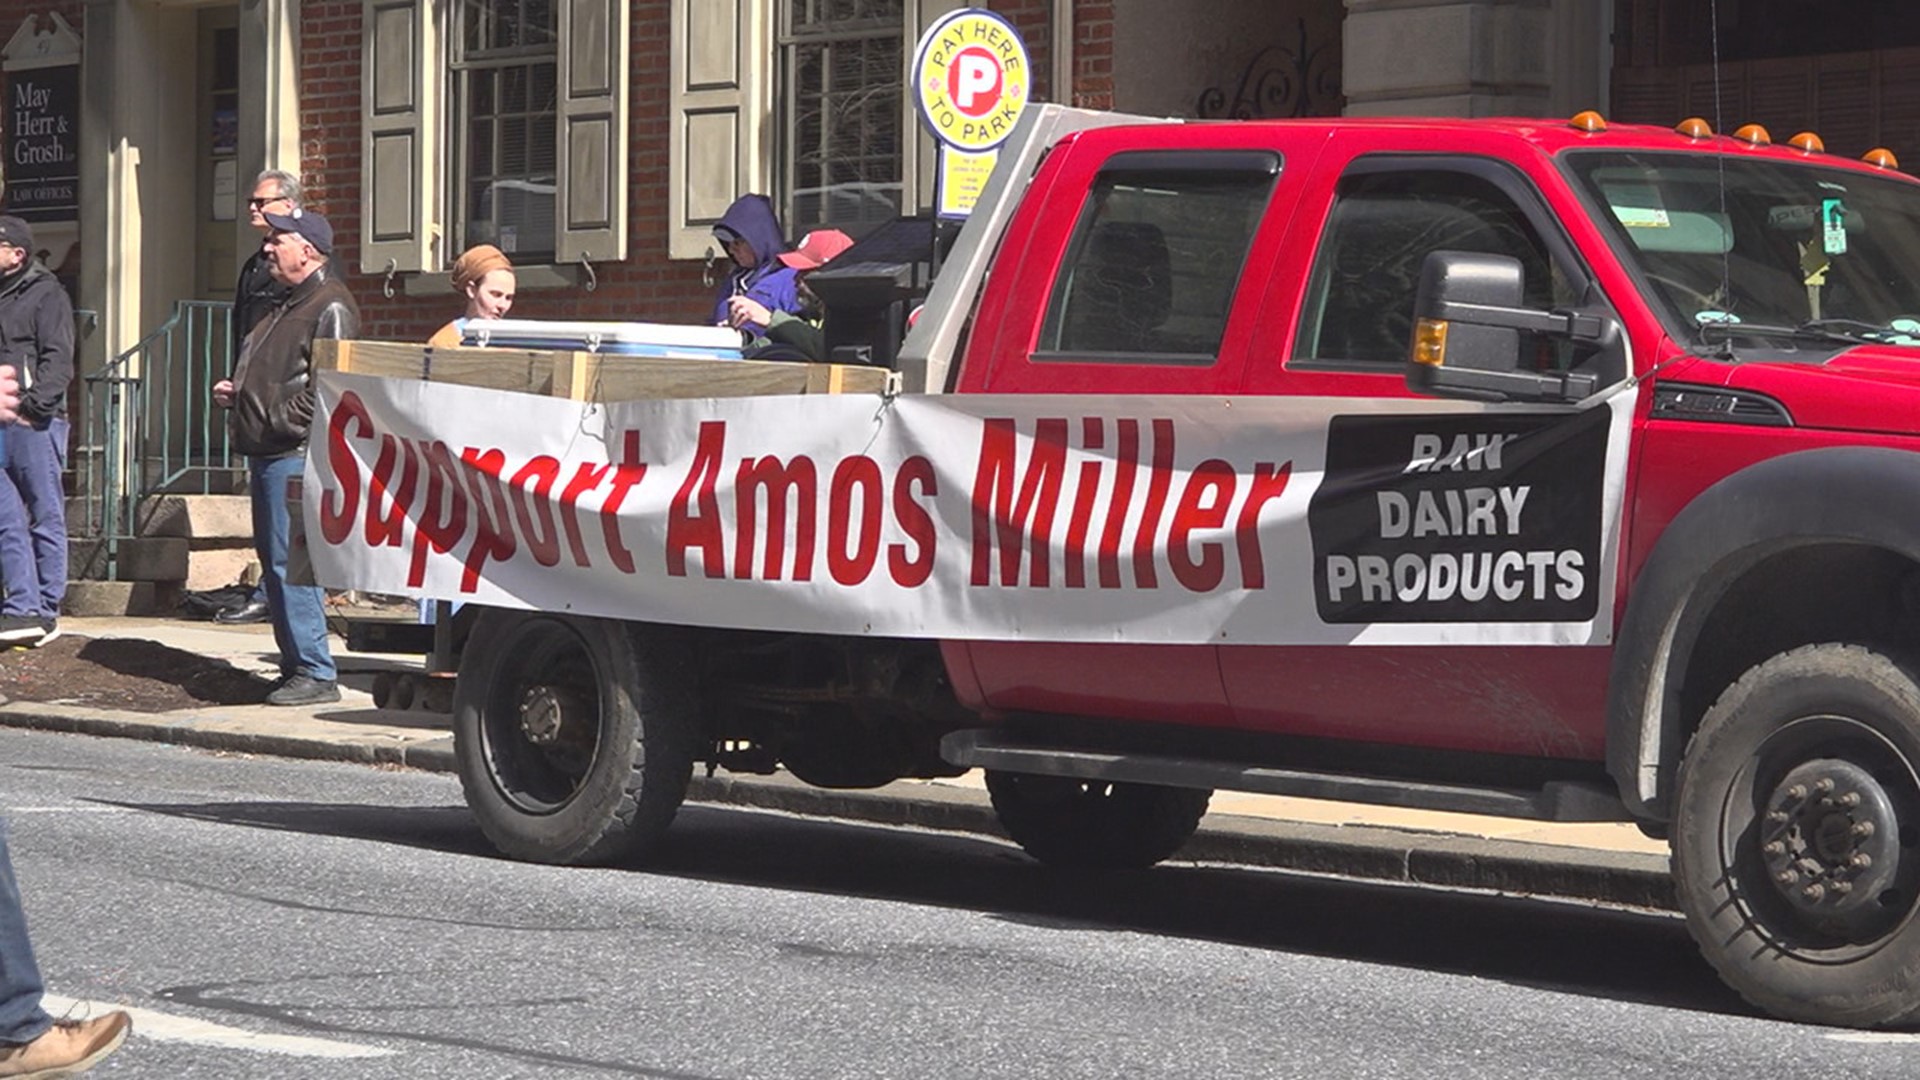 Amos Miller is being sued by the state Department of Agriculture and Attorney General for selling raw milk without a permit.